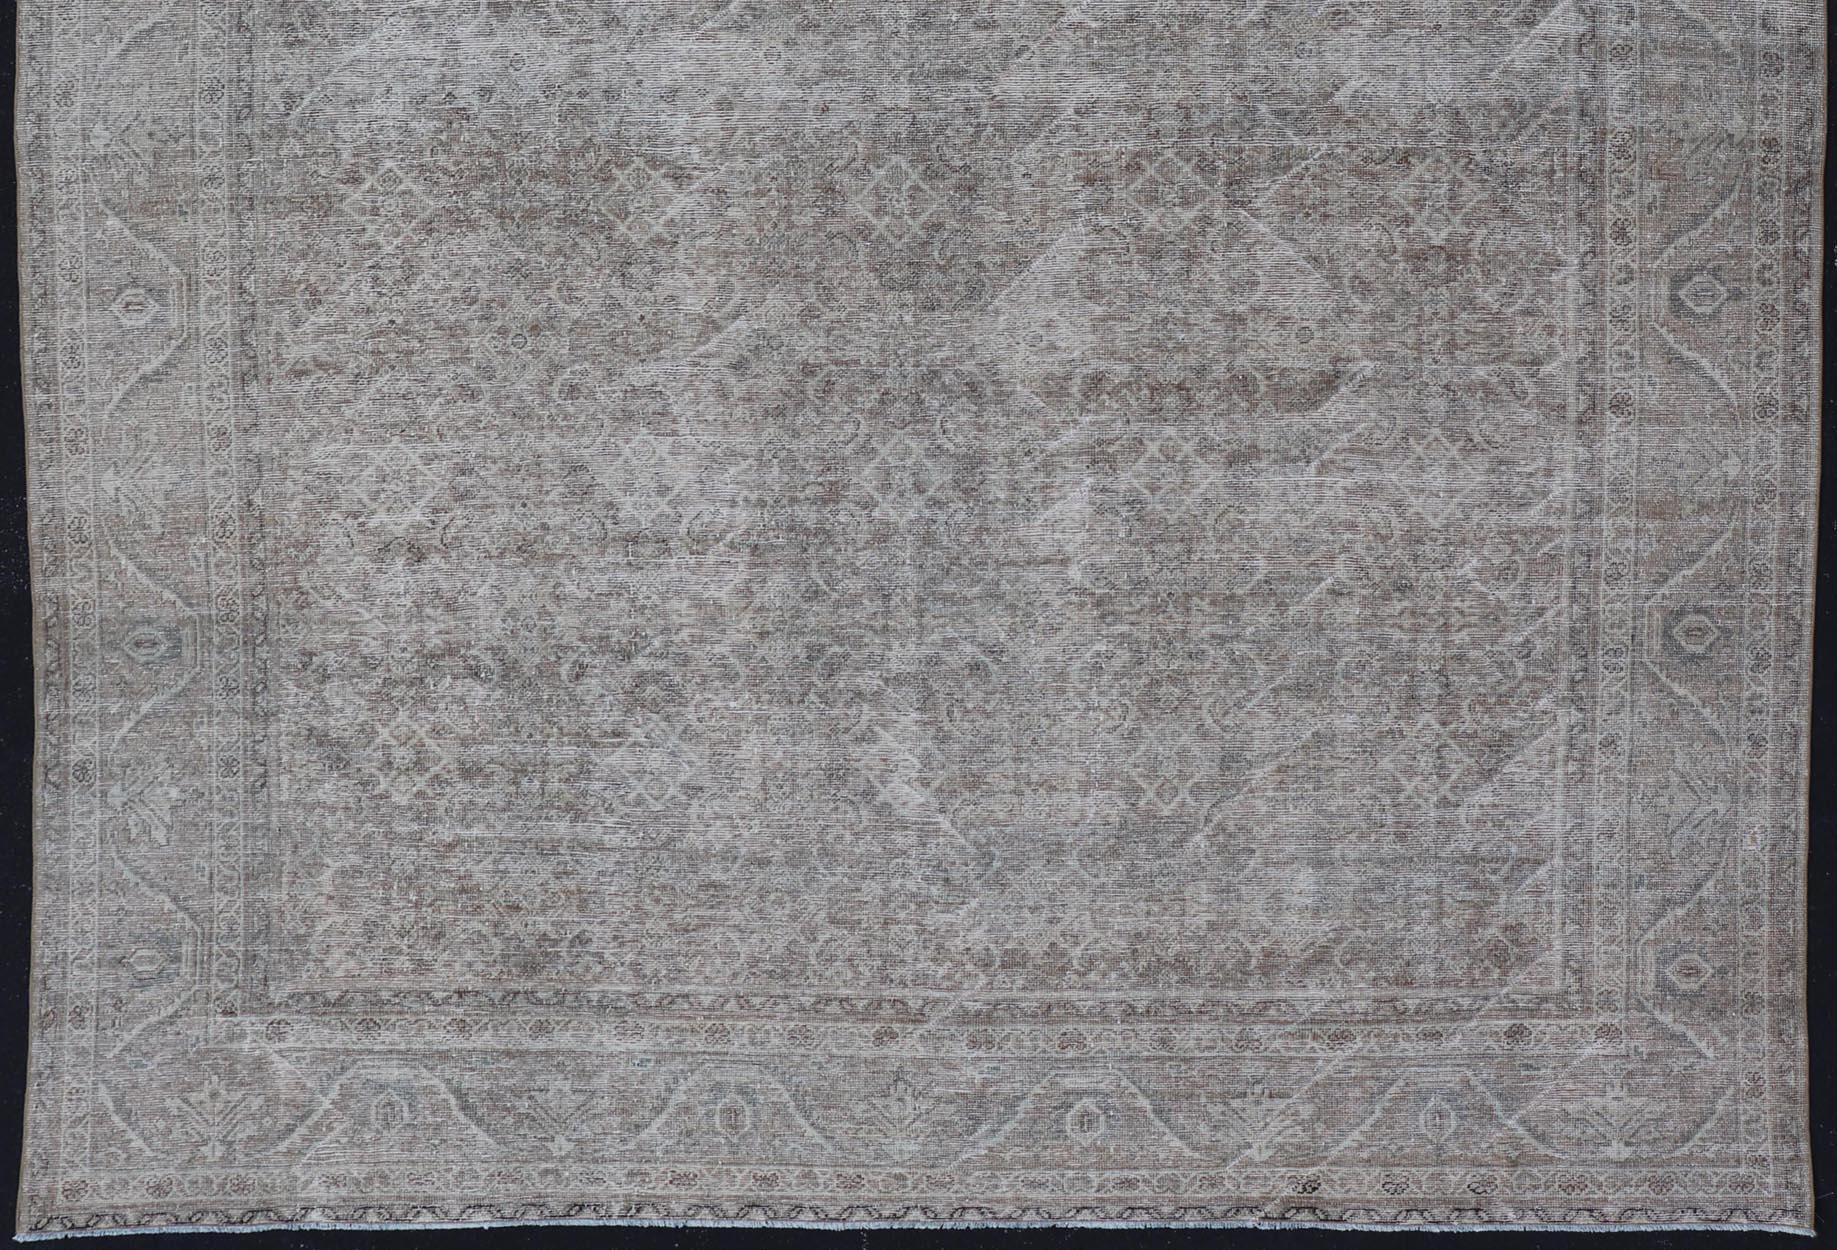 20th Century Antique Persian Distressed Mahal Rug in Warm Earthy Tones with All-Over Design